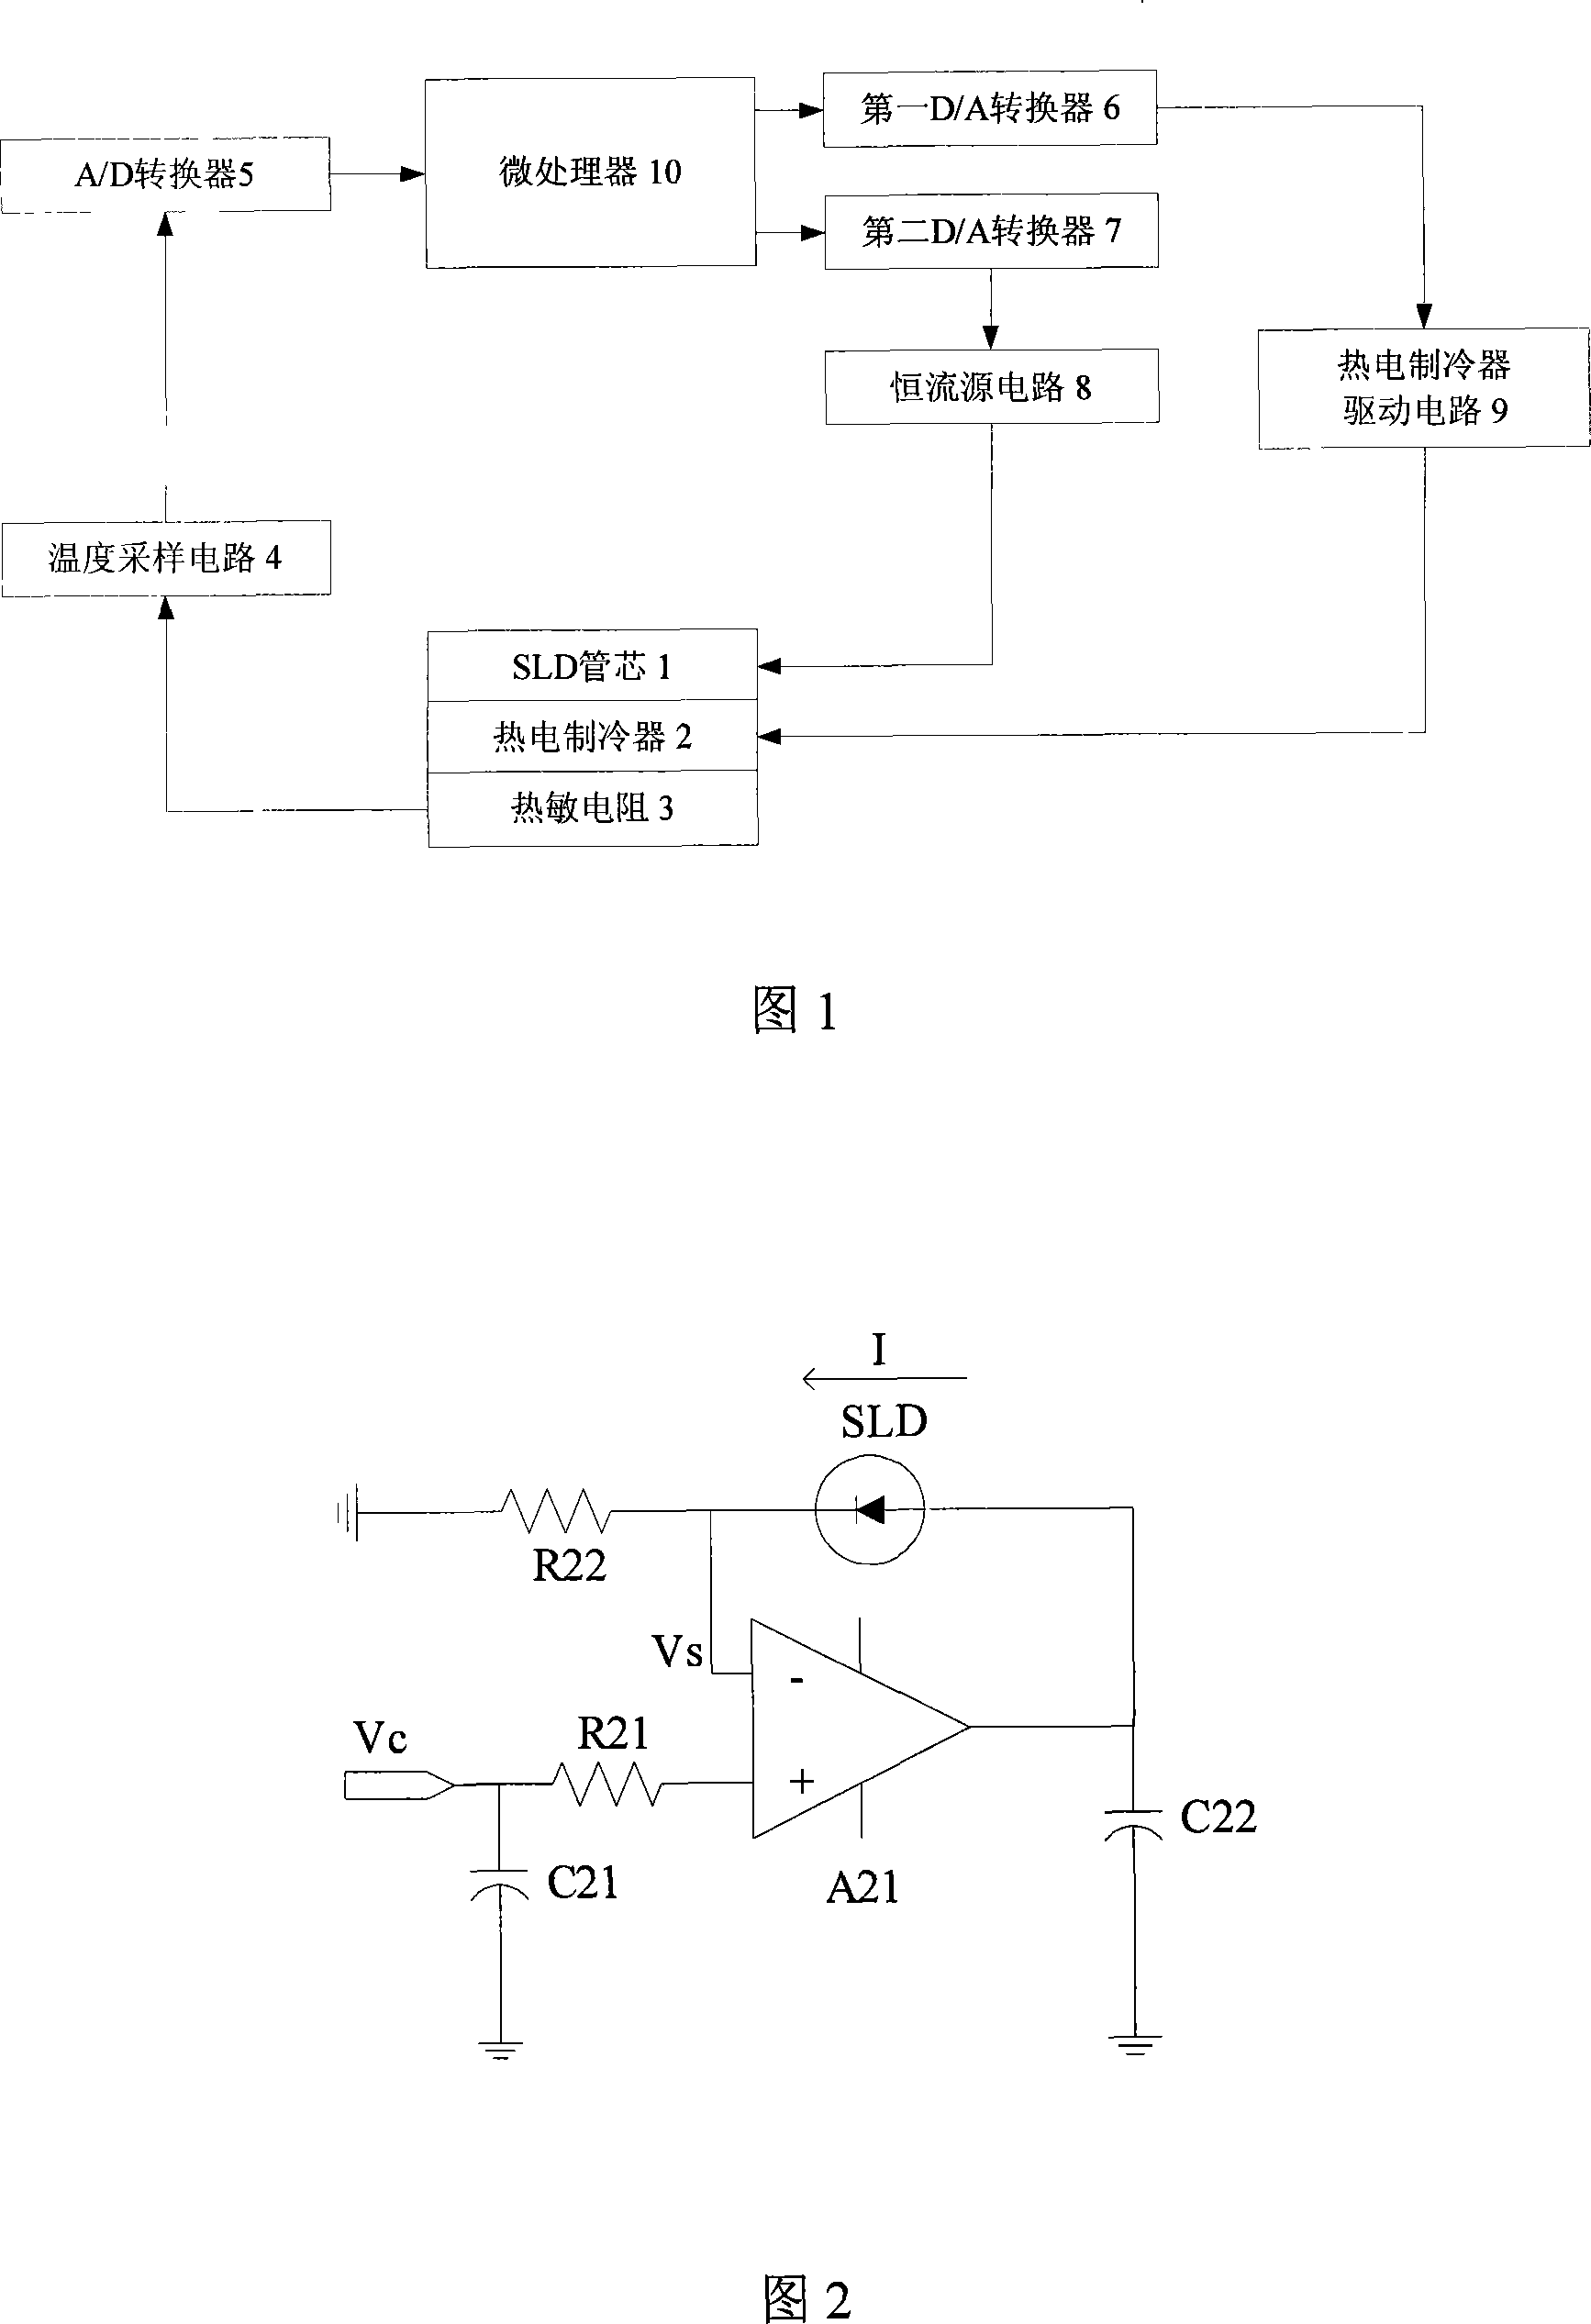 Numerical control driving method and device of super-radiance light emitting diode